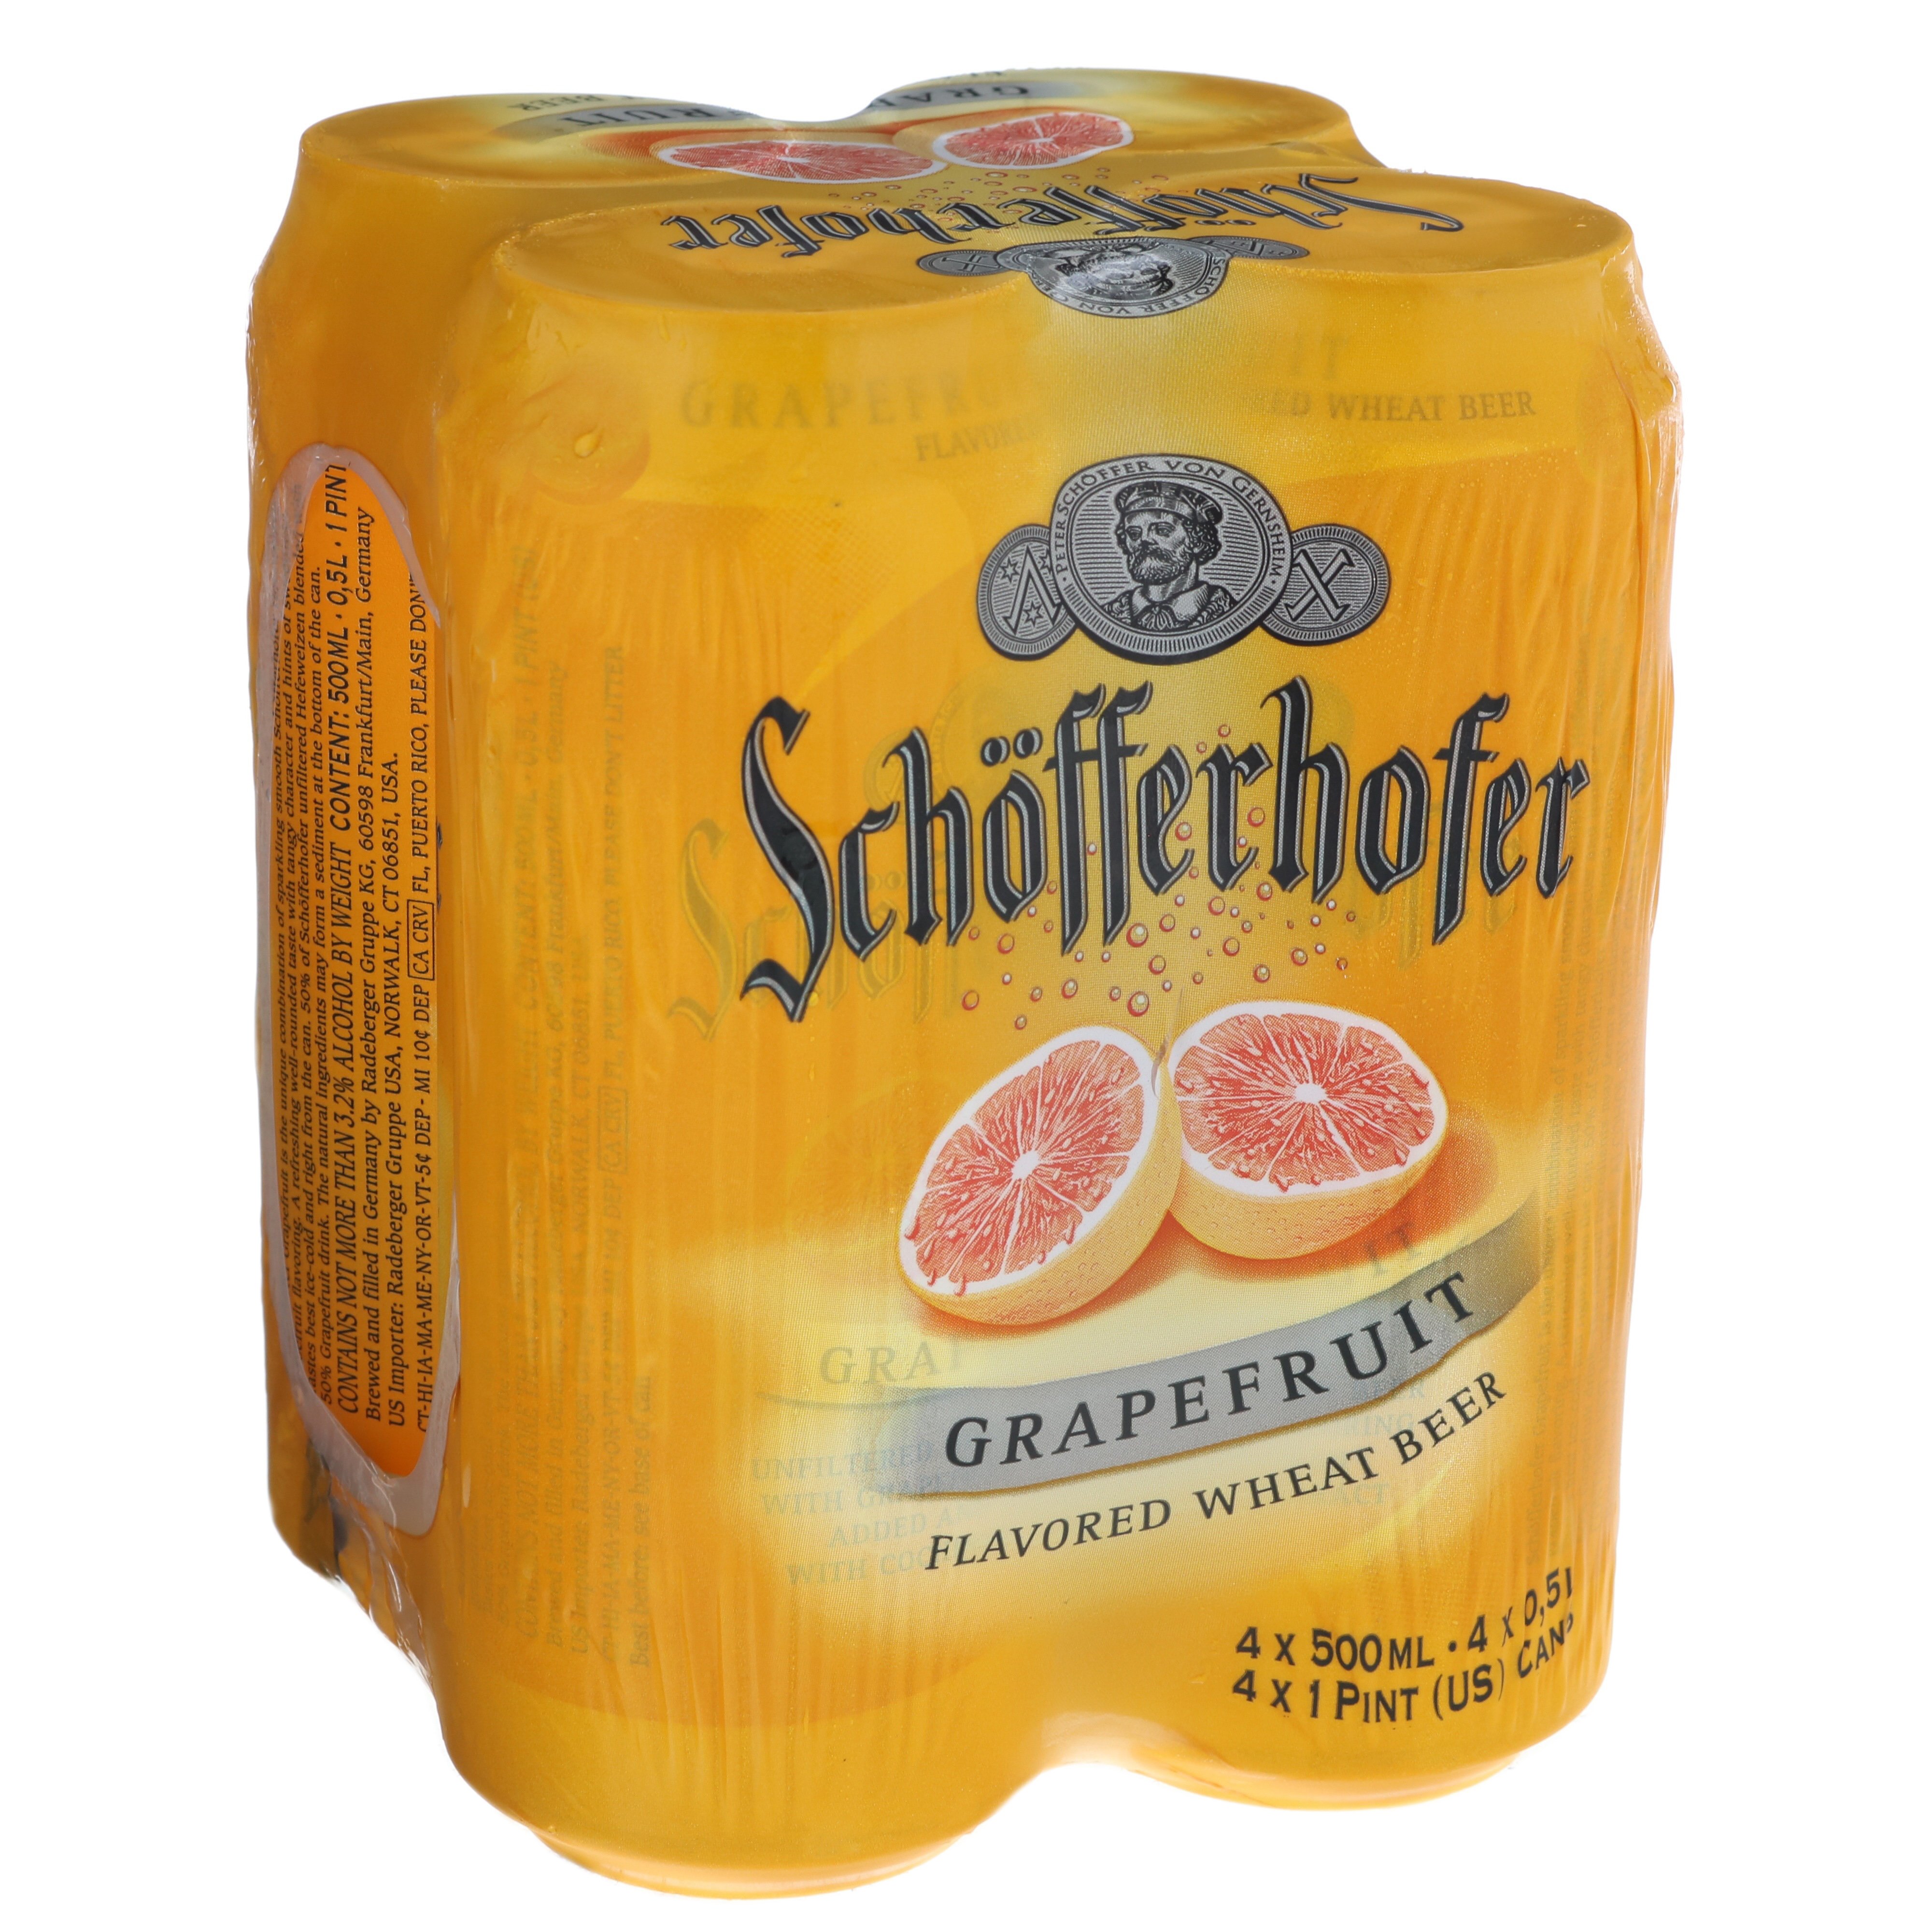 Schofferhofer Grapefruit Hefe Wheat Beer 16 9 Oz Cans Shop Beer At H E B,Cooking Ribs With Membrane On